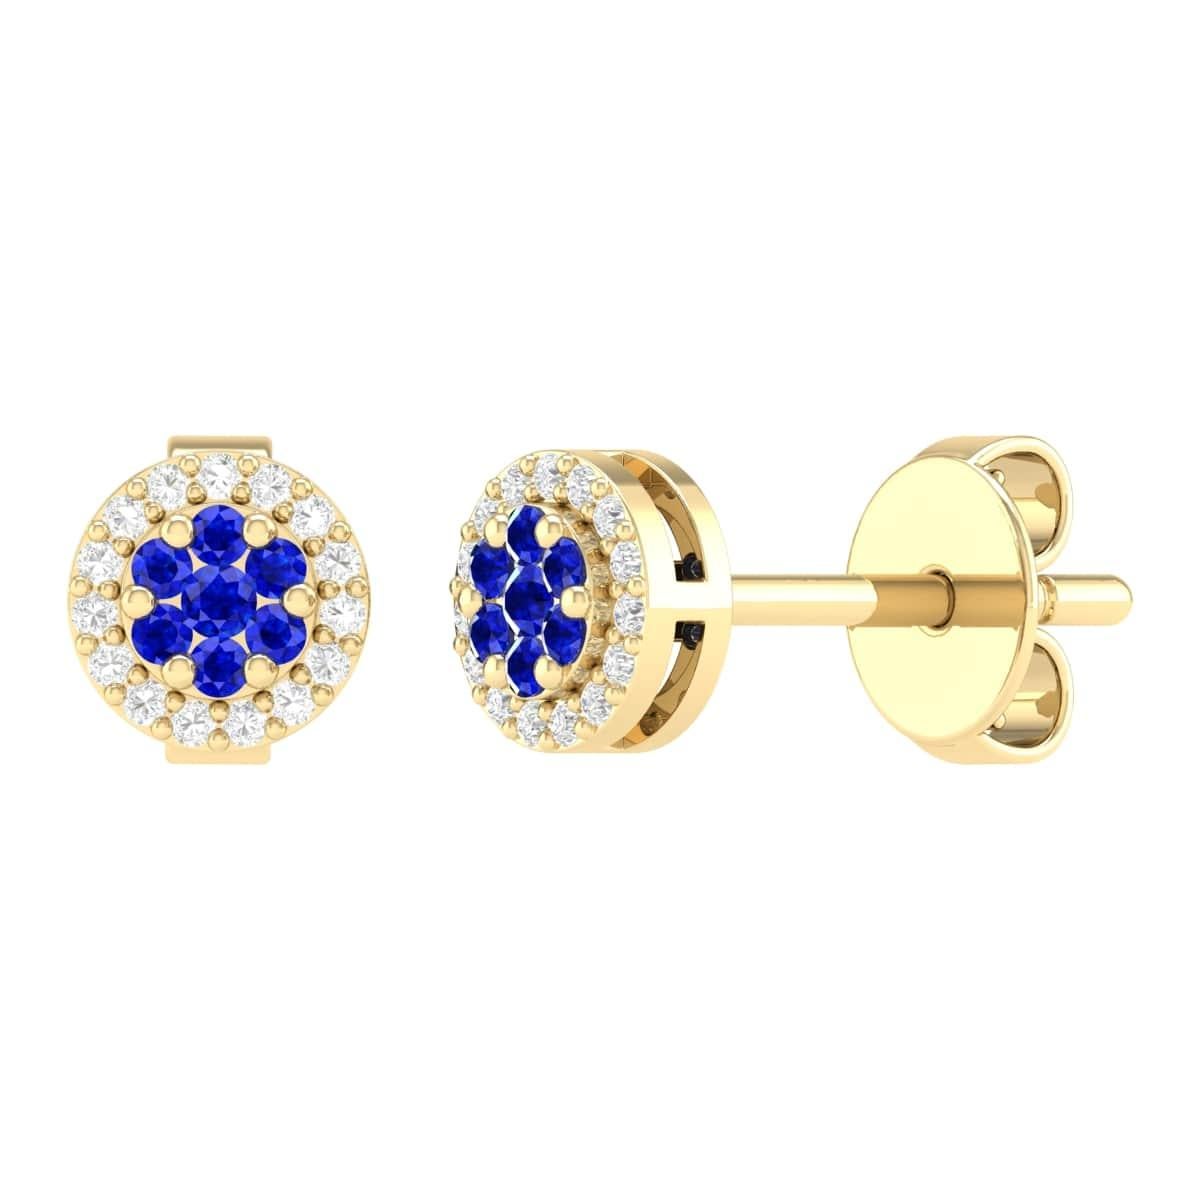 18 Karat Yellow Gold 0.19 Carat Sapphire Cocktail Stud Earrings For Sale